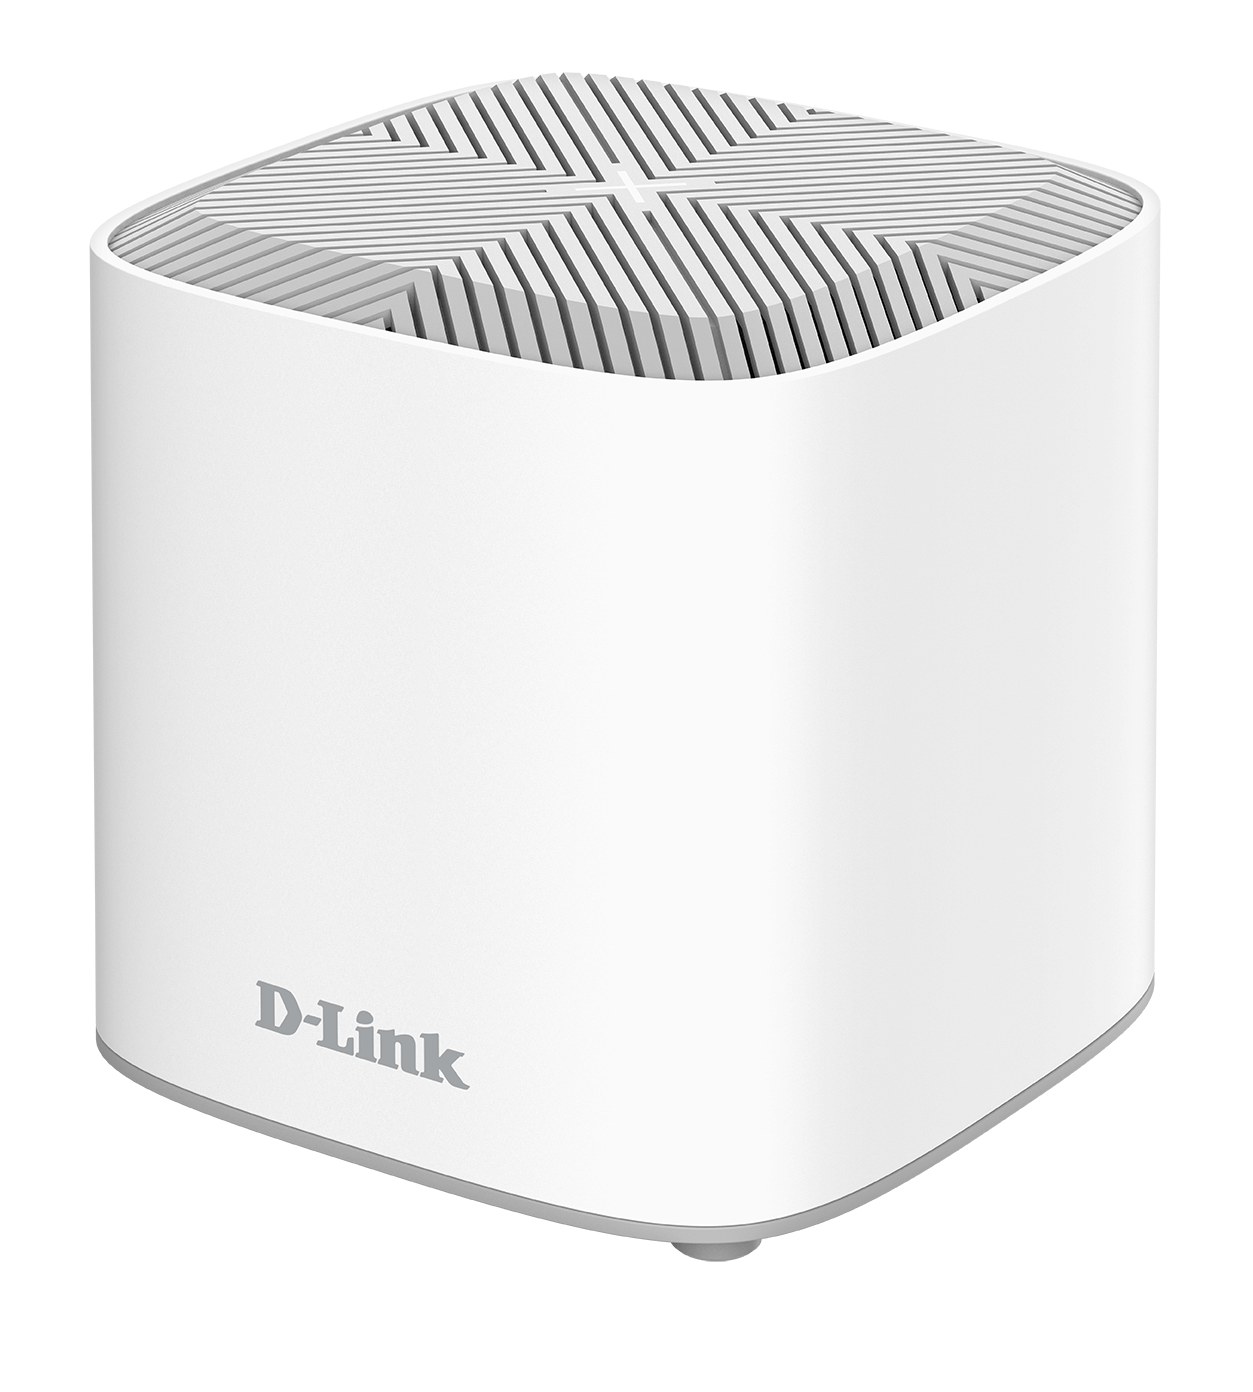 D-Link Covr Whole Home Mesh Wi-Fi: Wi-Fi 6 for everyone